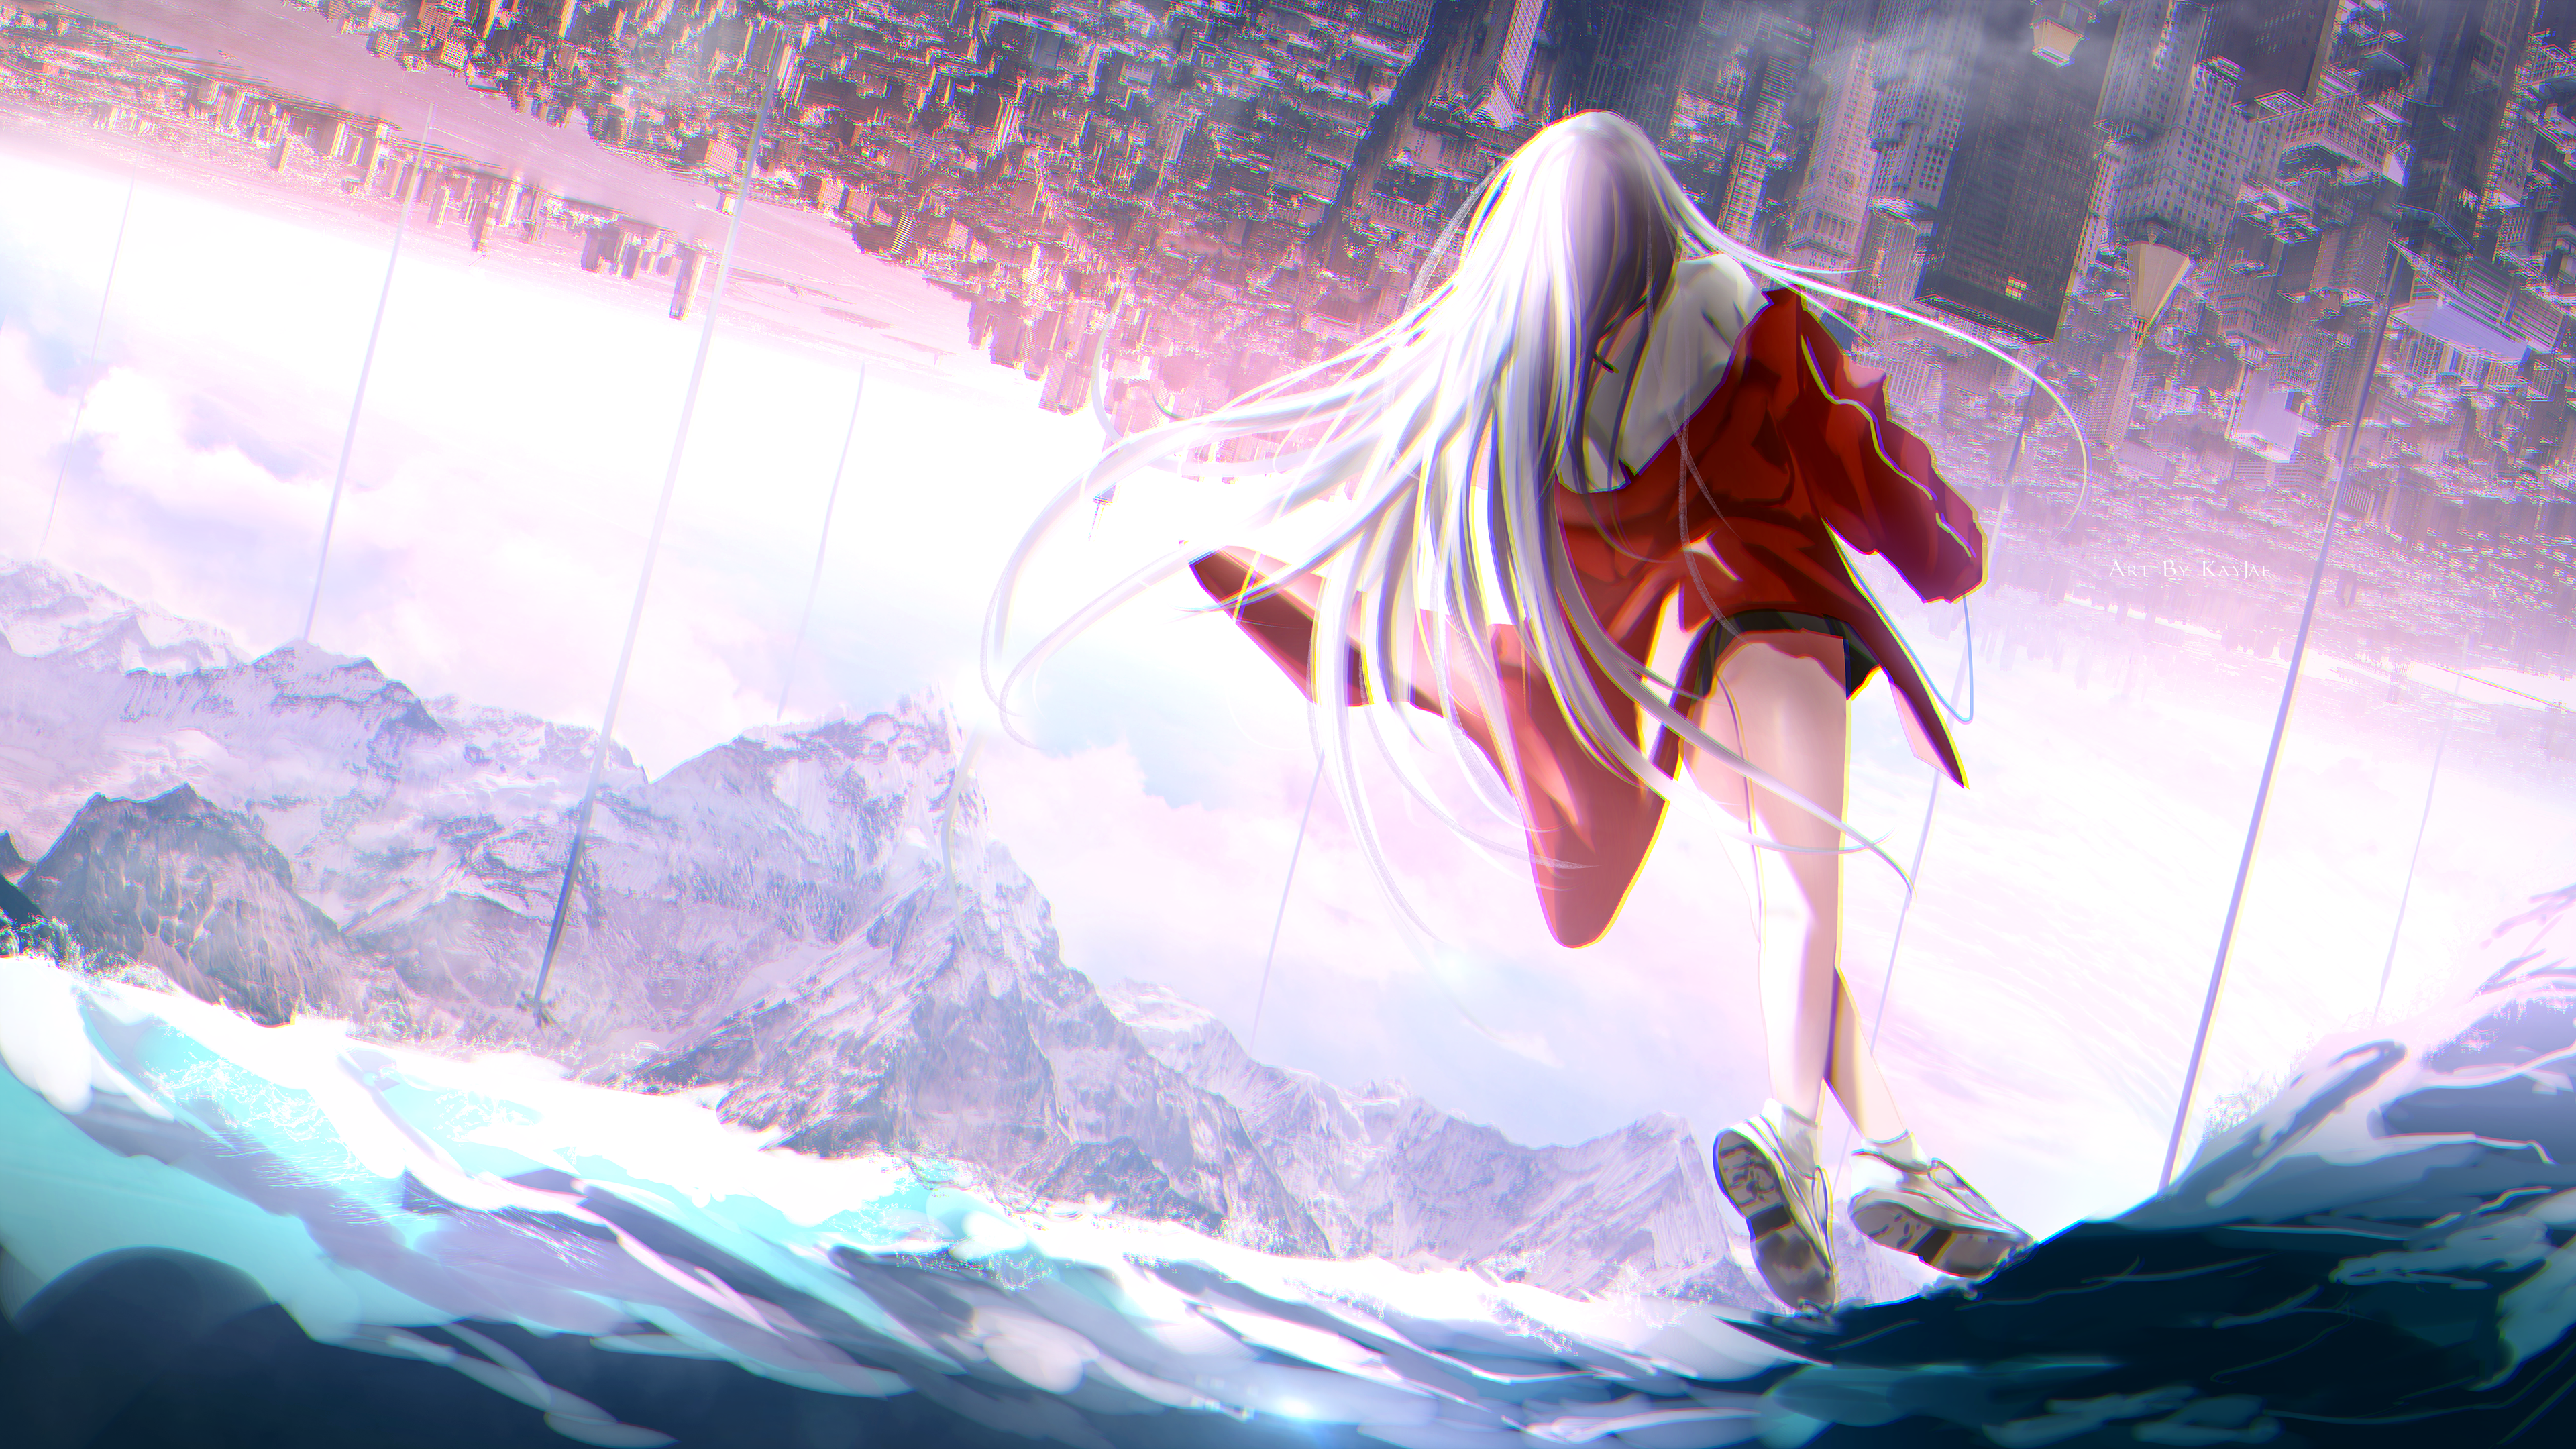 Anime Anime Girls Mountains Red Dress Blonde Long Hair City Sky Clouds Sneakers Walking Sea 3840x2160